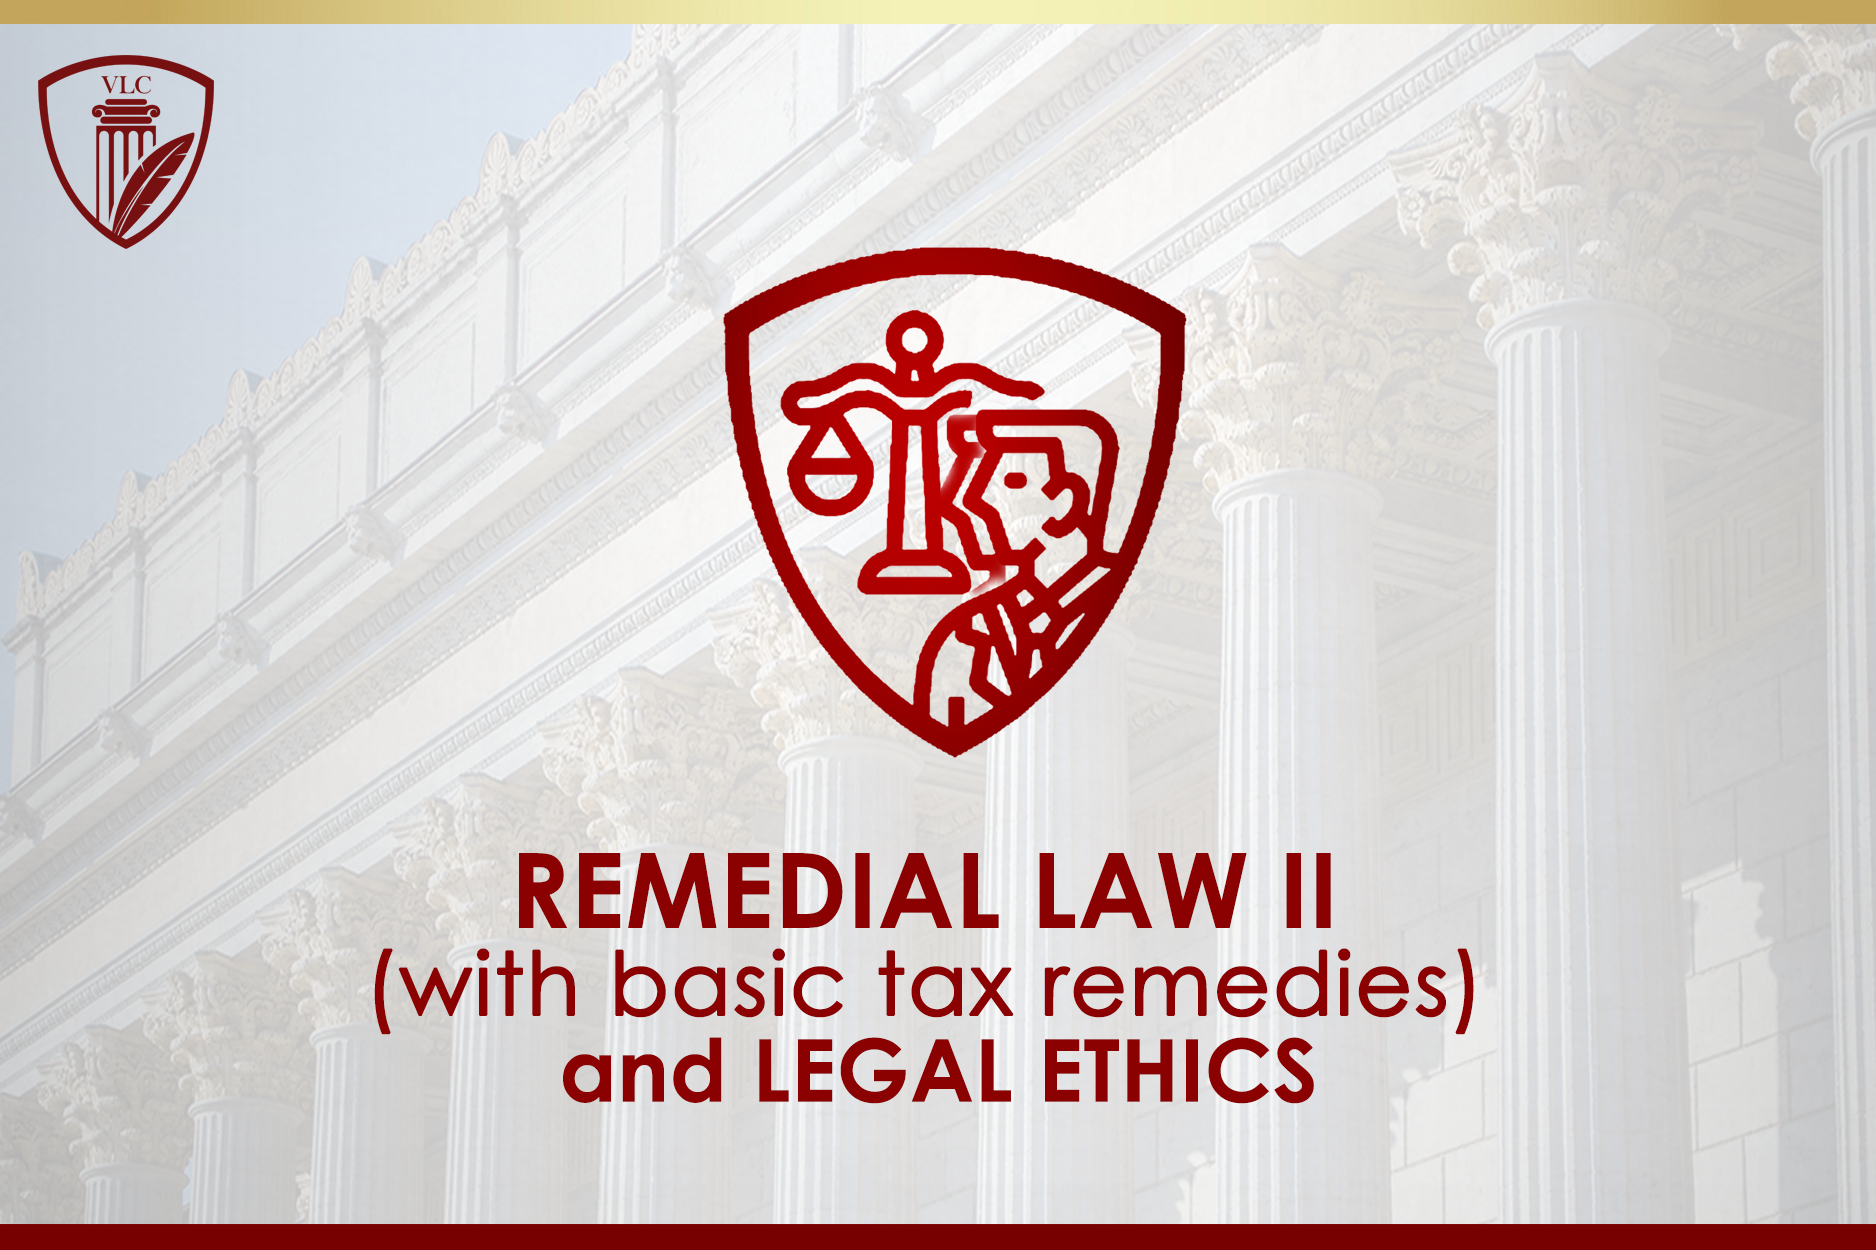 Remedial Law II (with basic tax remedies) and Legal Ethics